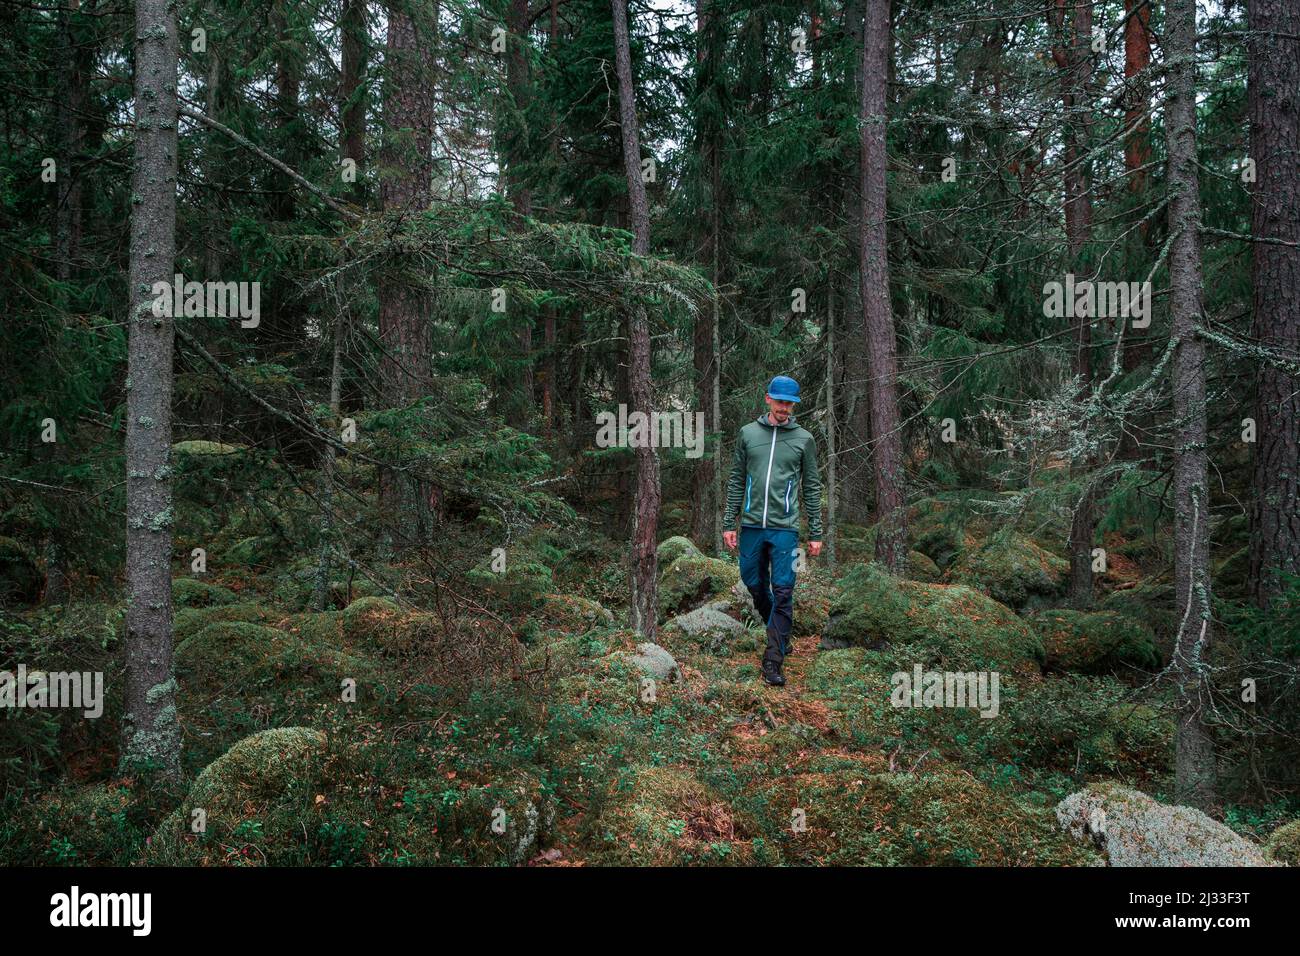 Man hiking through forest with moss covered ground in Tyresta National Park in Sweden Stock Photo